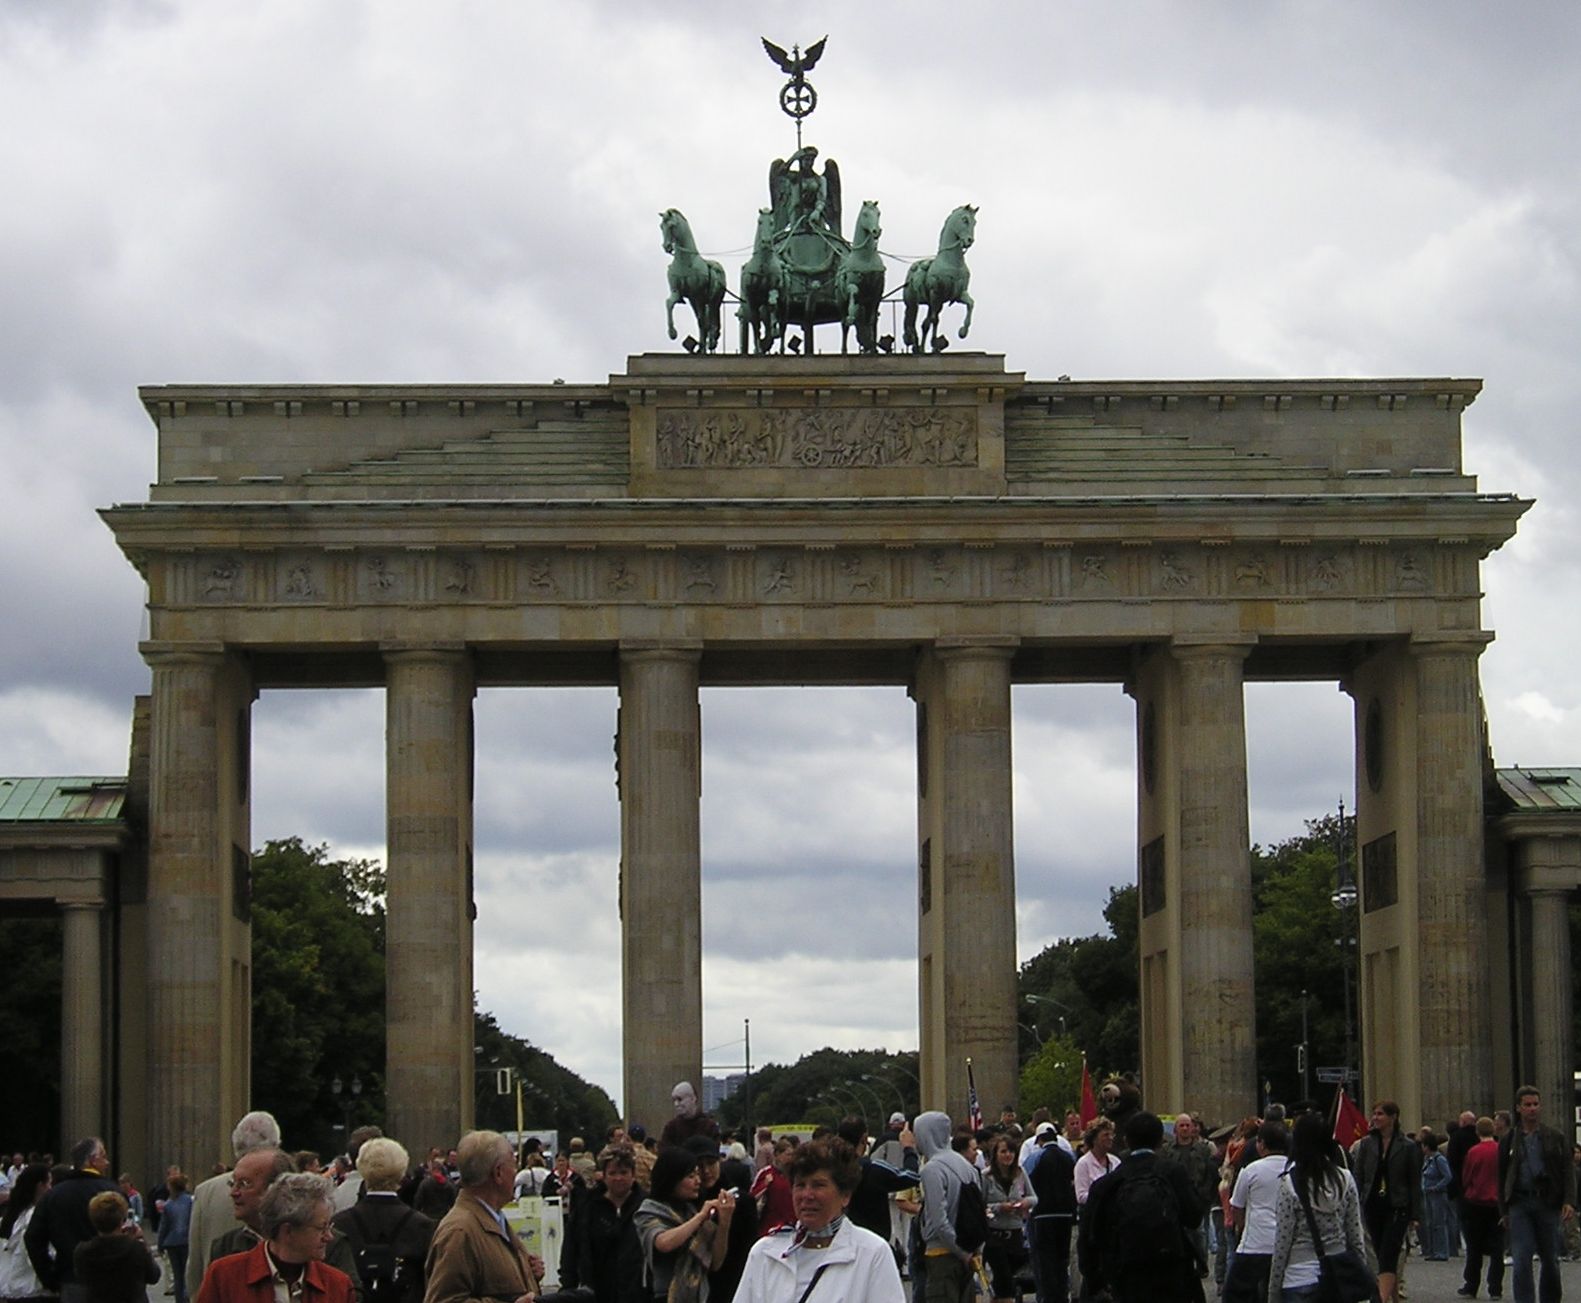 a crowd of people standing around in front of a monument